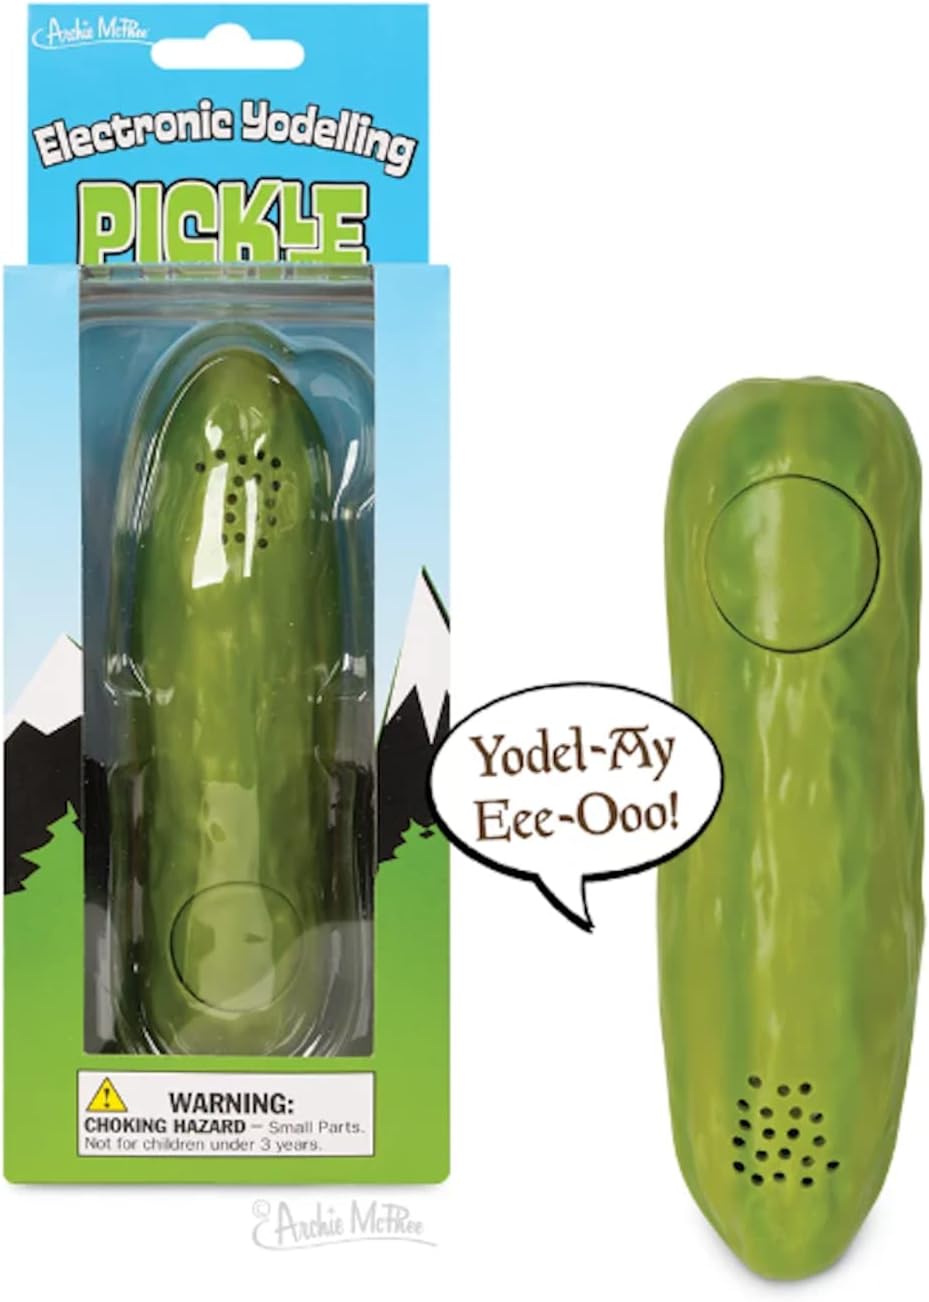 Archie McPhee Yodeling Pickle Review